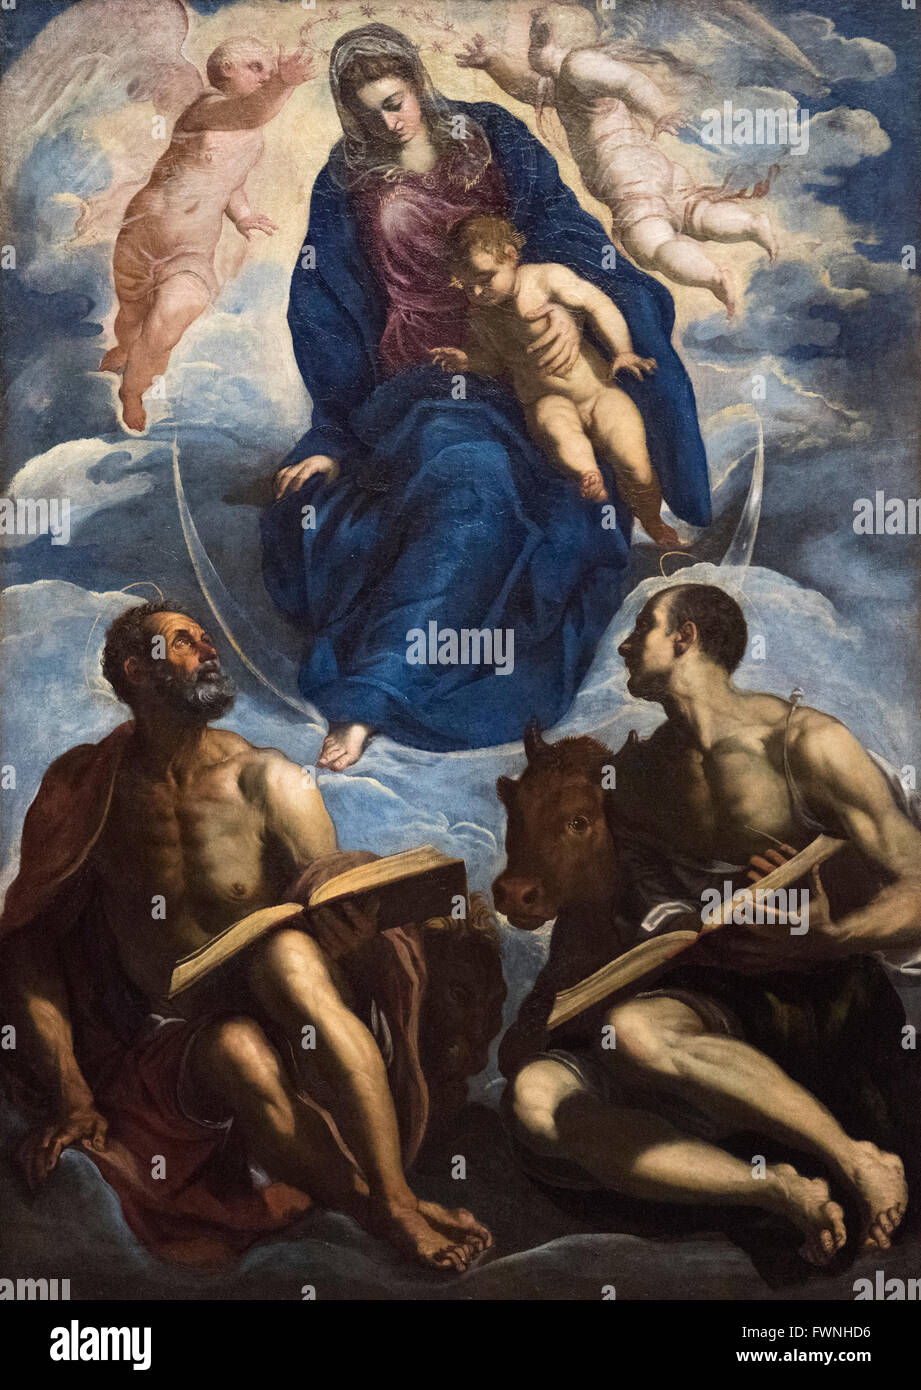 Tintoretto - Jacopo Robusti (1518-1594), Mary with the Child, Venerated by St Mark and St Luke, before 1570. Stock Photo